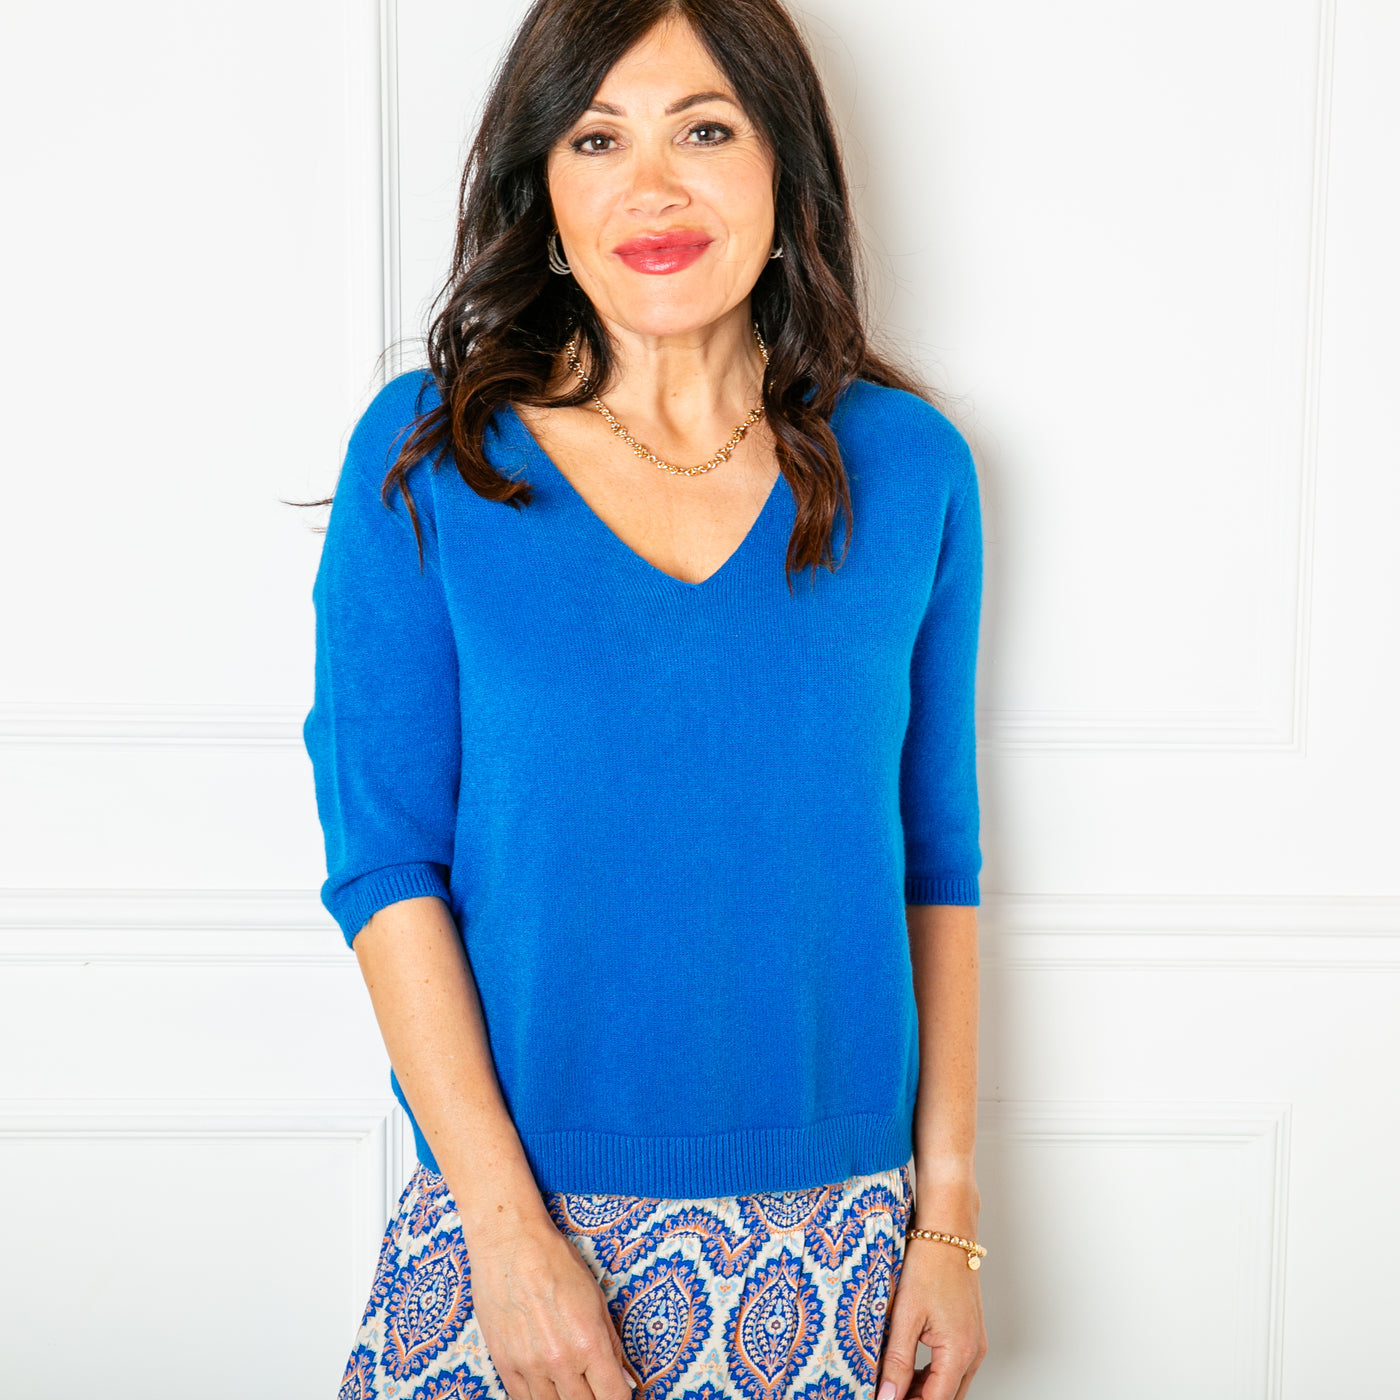 The royal blue Knitted Short Sleeve Top with a v neckline and 3/4 length sleeves